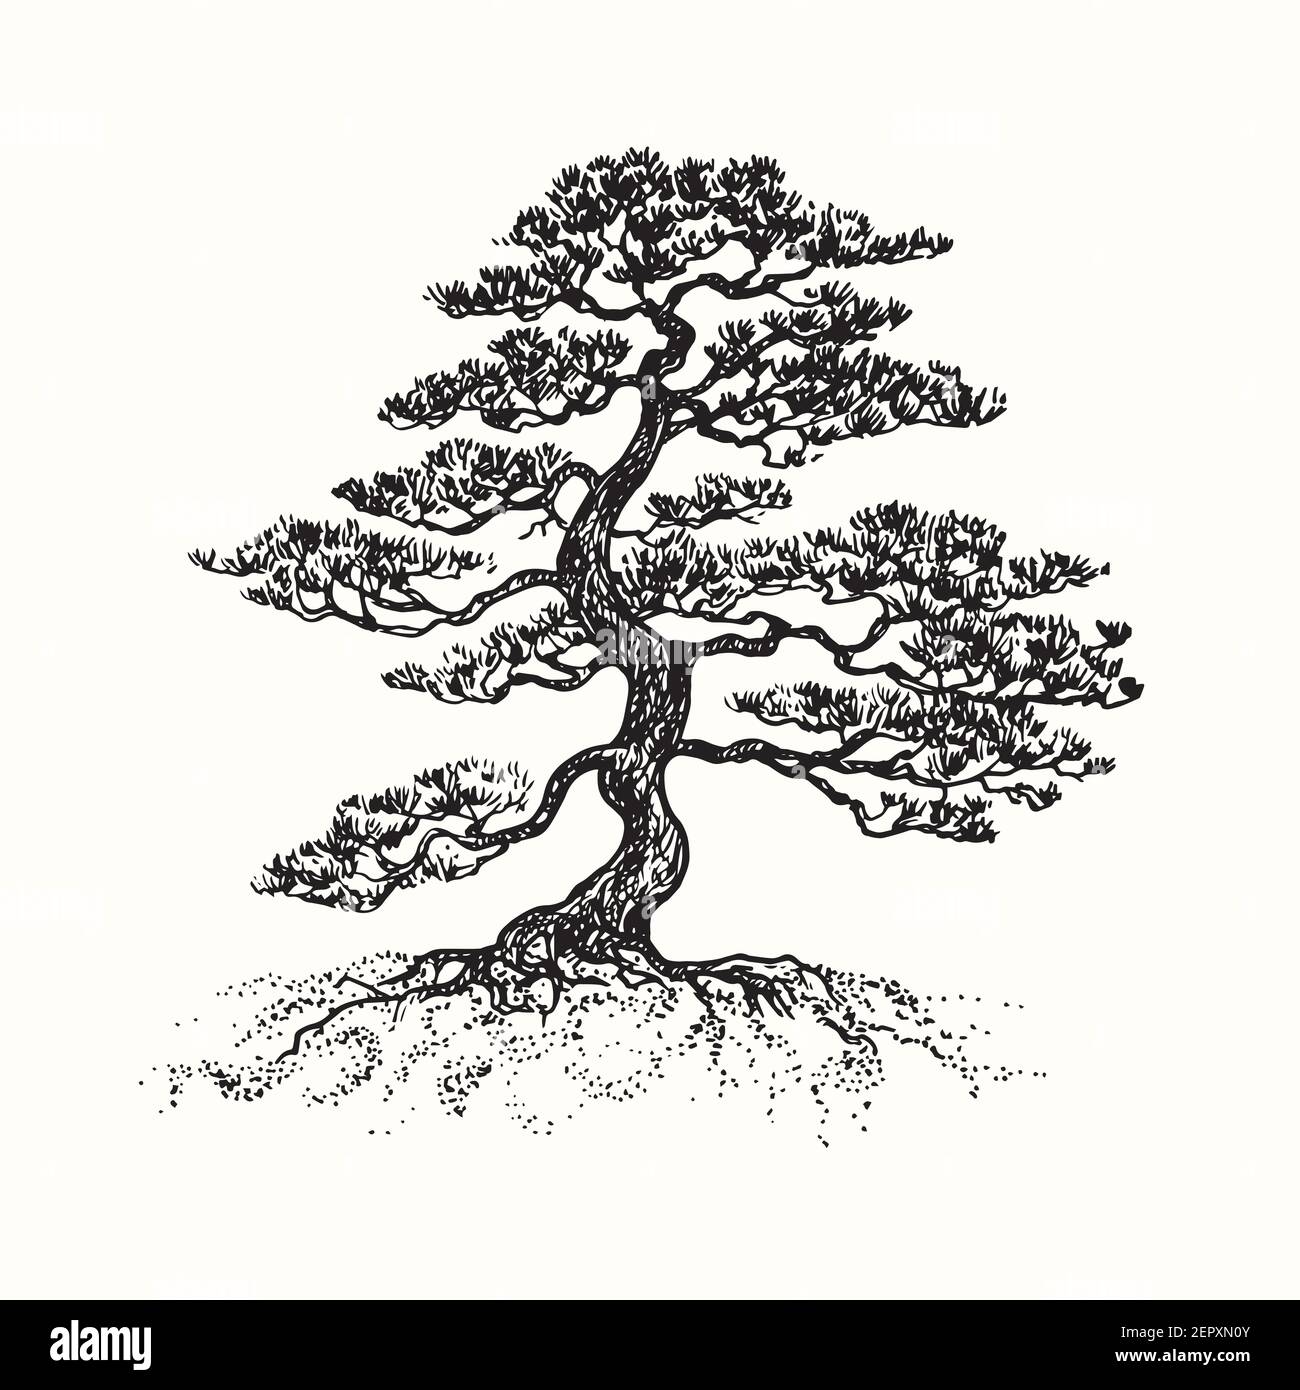 Hand drawn pine tree silhouette. Ink black and white drawing. Stock Photo